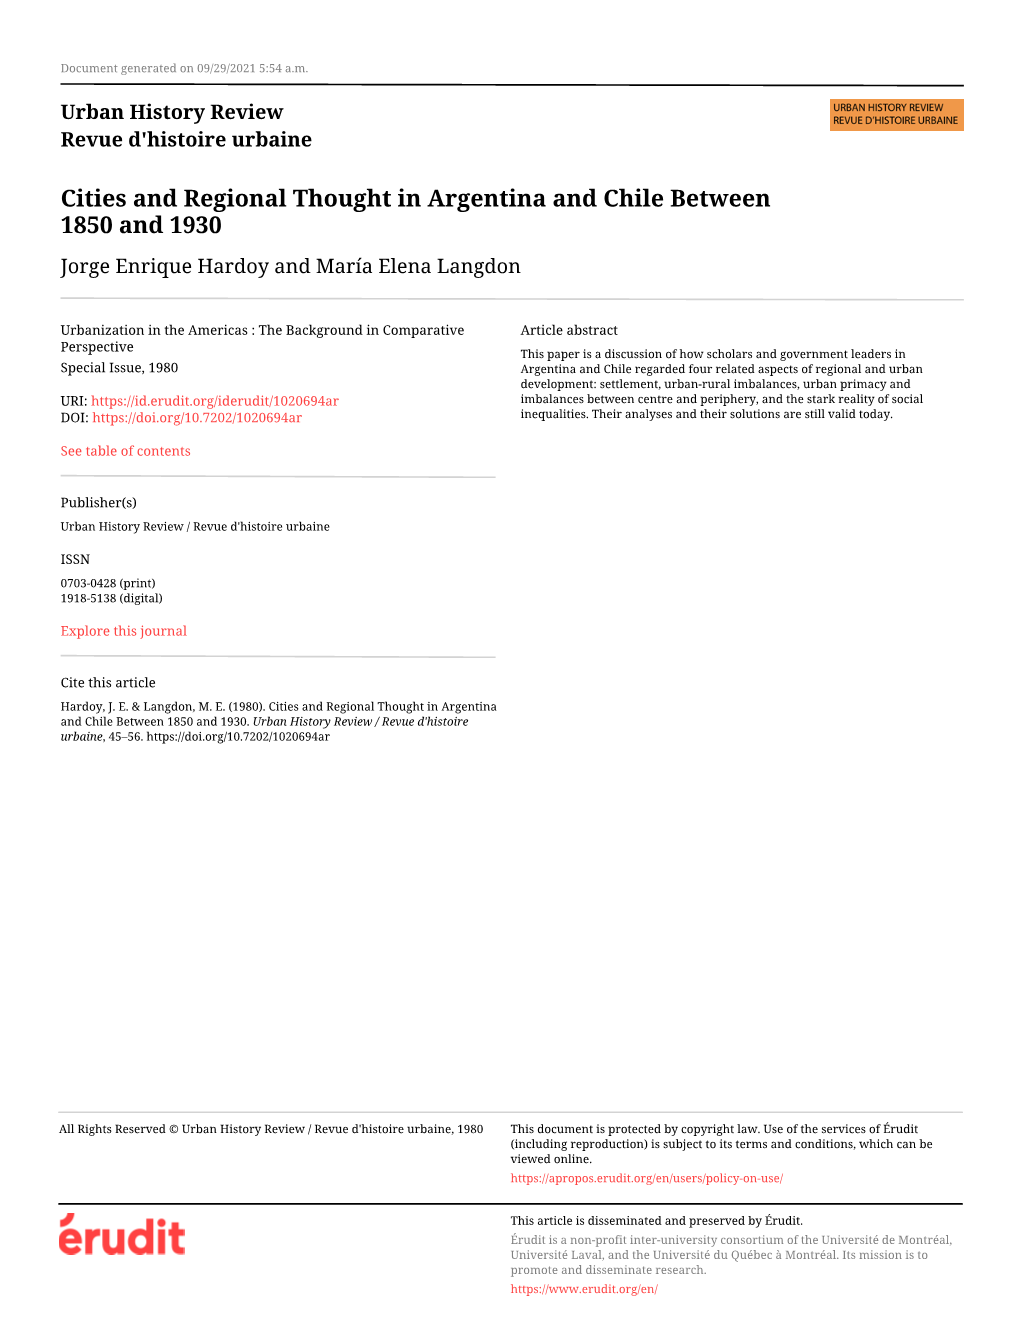 Cities and Regional Thought in Argentina and Chile Between 1850 and 1930 Jorge Enrique Hardoy and María Elena Langdon